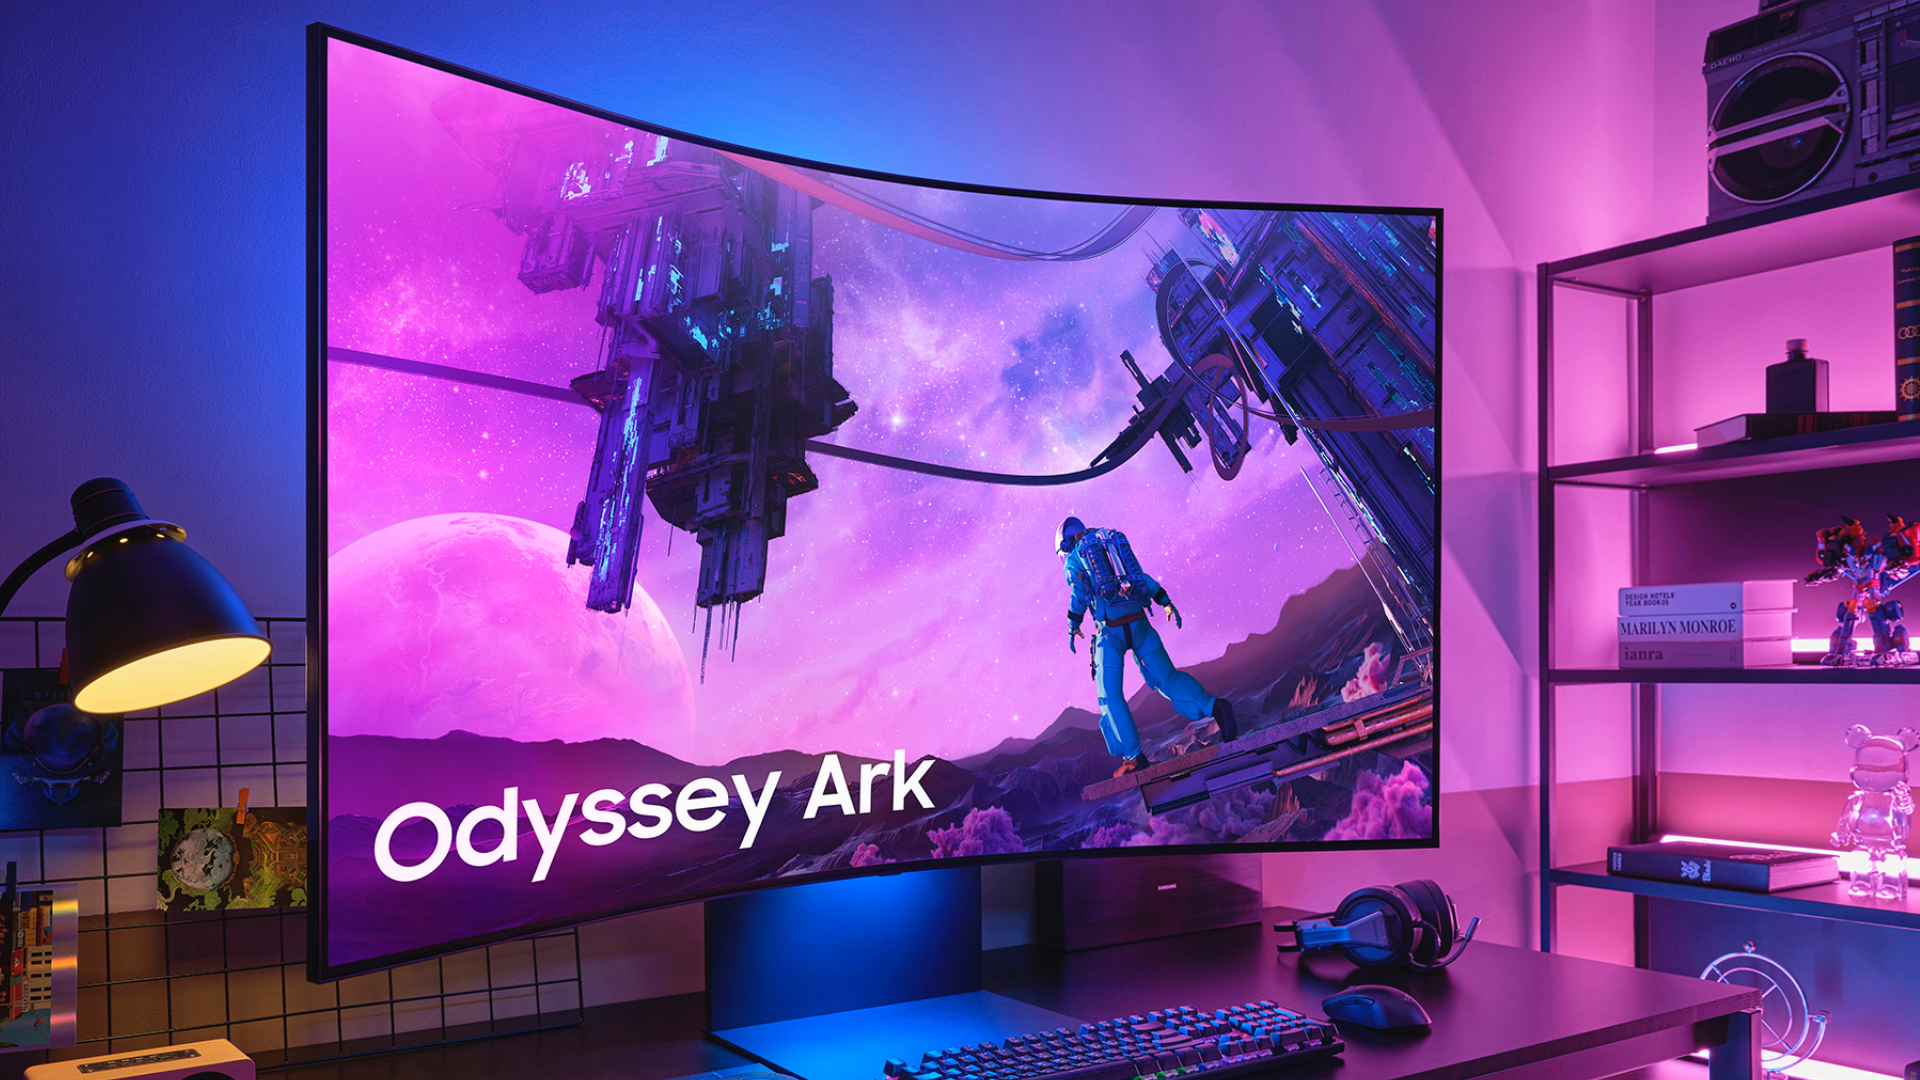 Samsung unveils 57-inch Odyssey Neo G9 curved displays for more